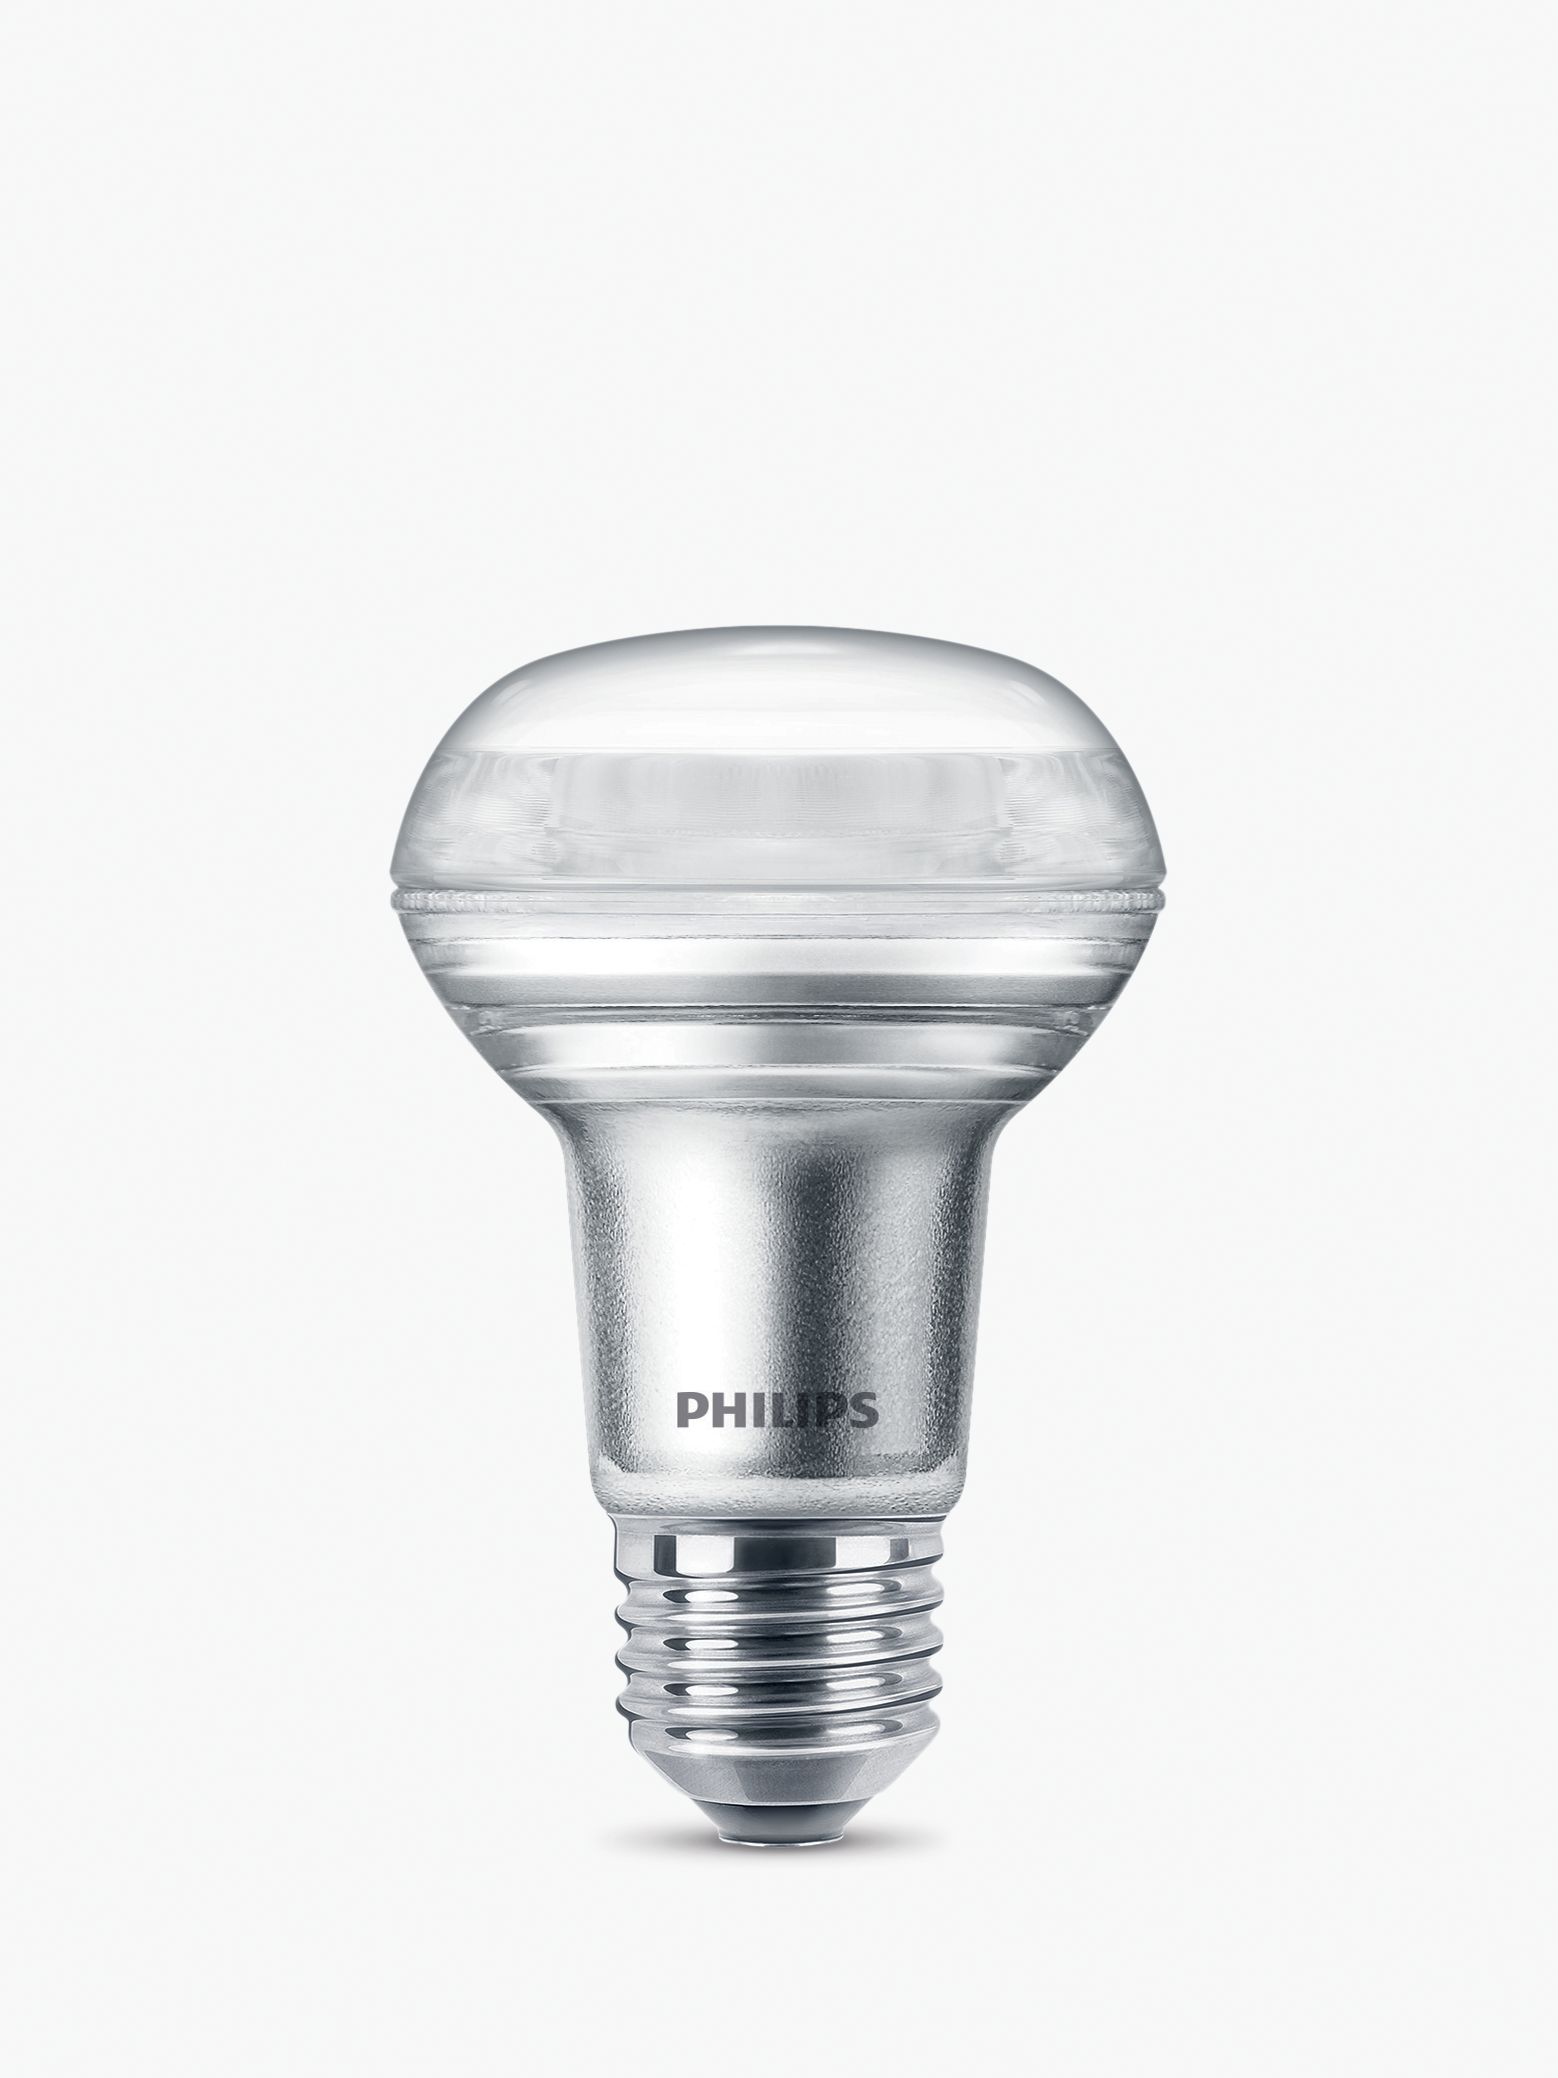 Photo of Philips 5w es led dimmable r63 reflector bulb clear